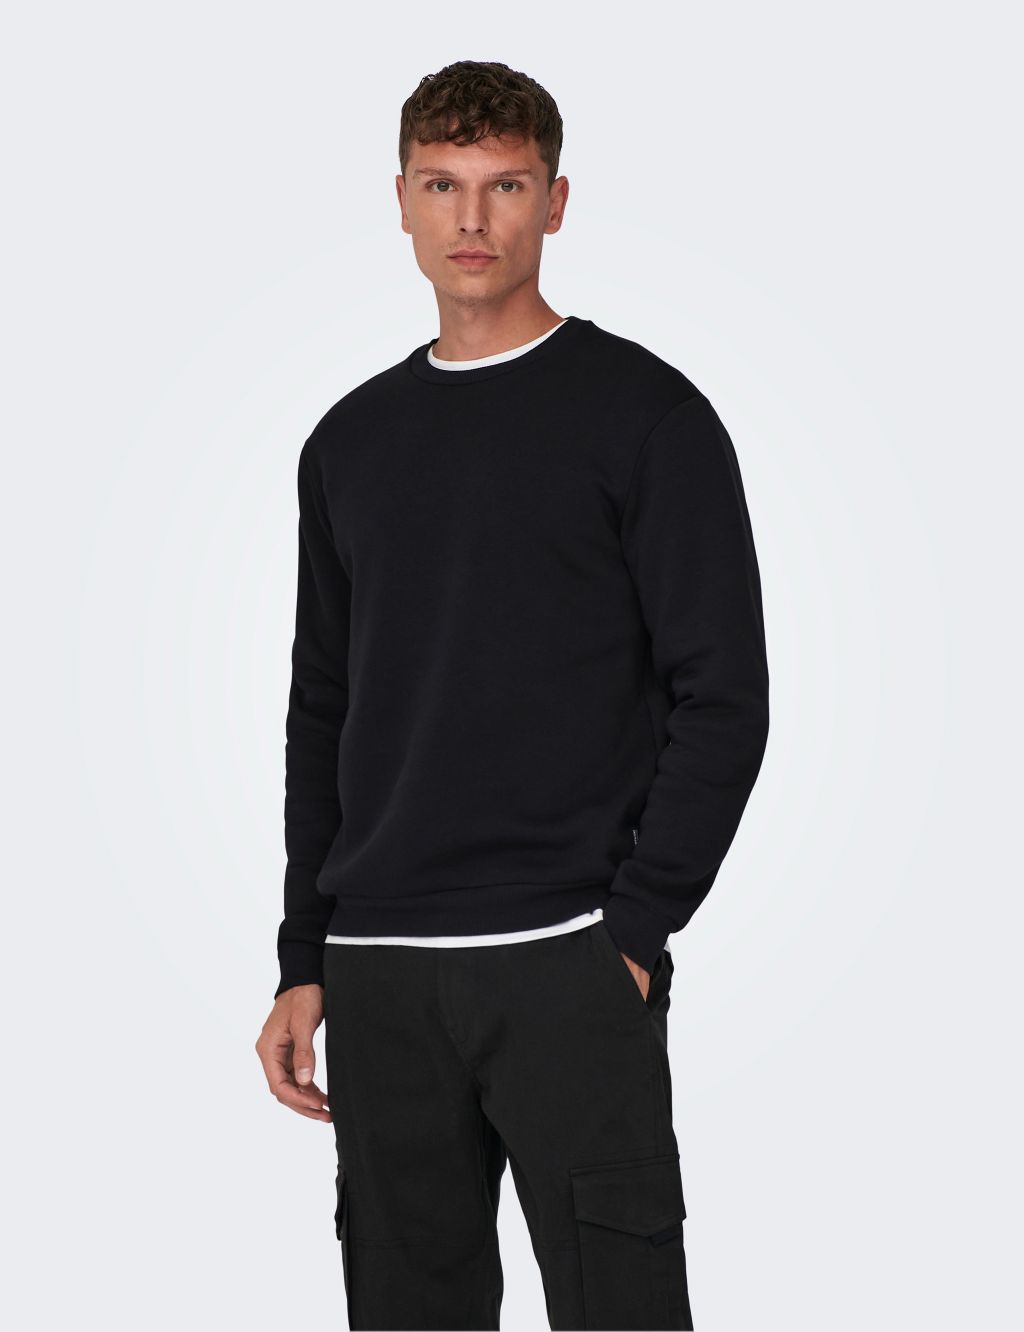 Tapered Fit Cargo Trousers image 3